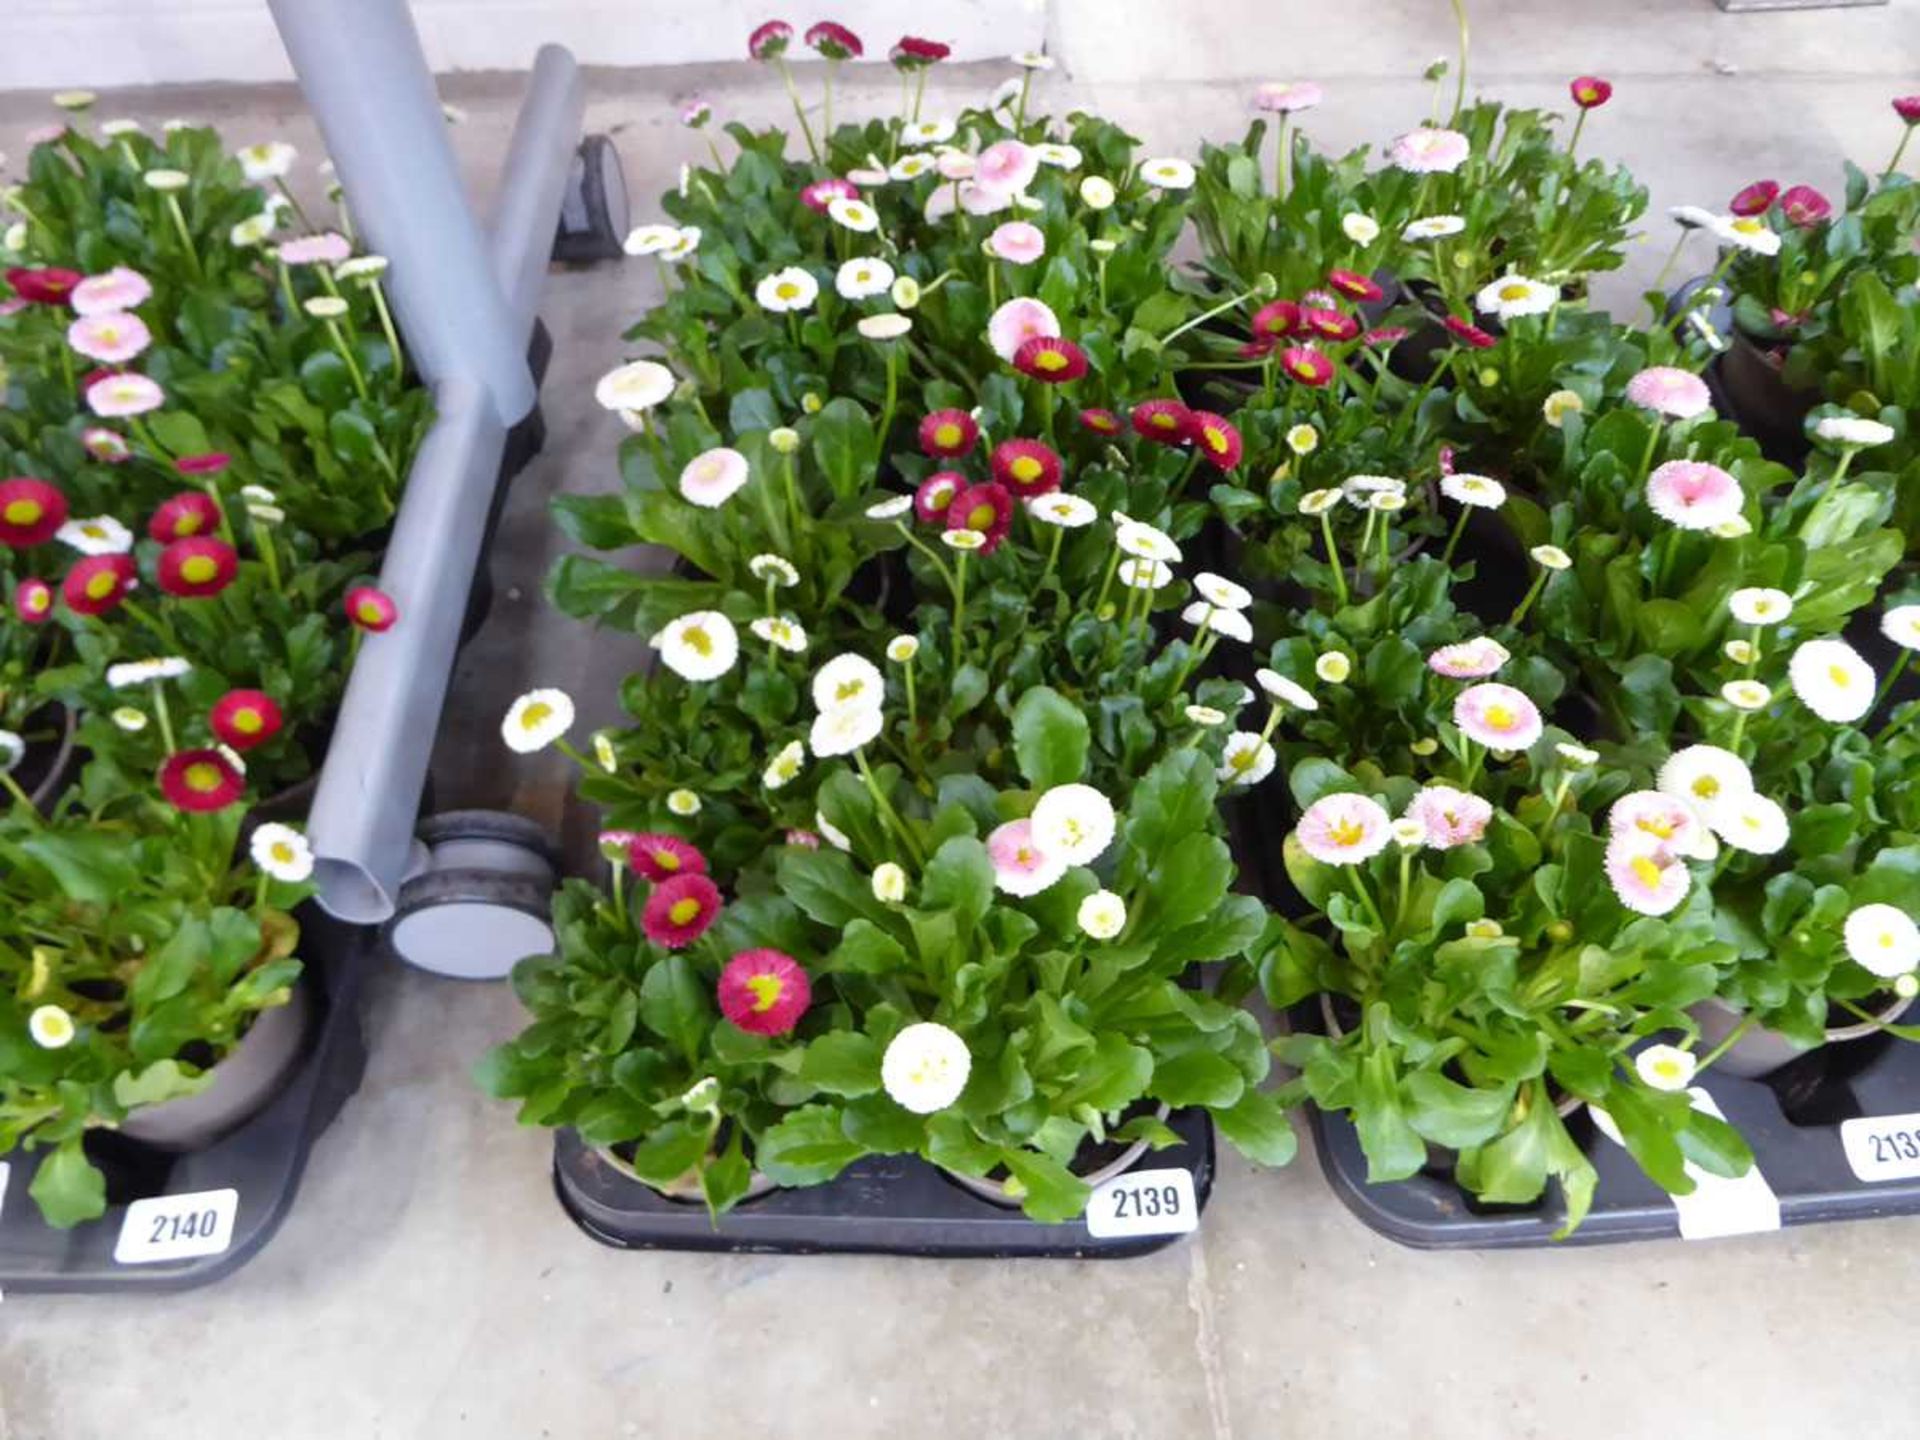 Tray containing 8 pots of bellis daisies